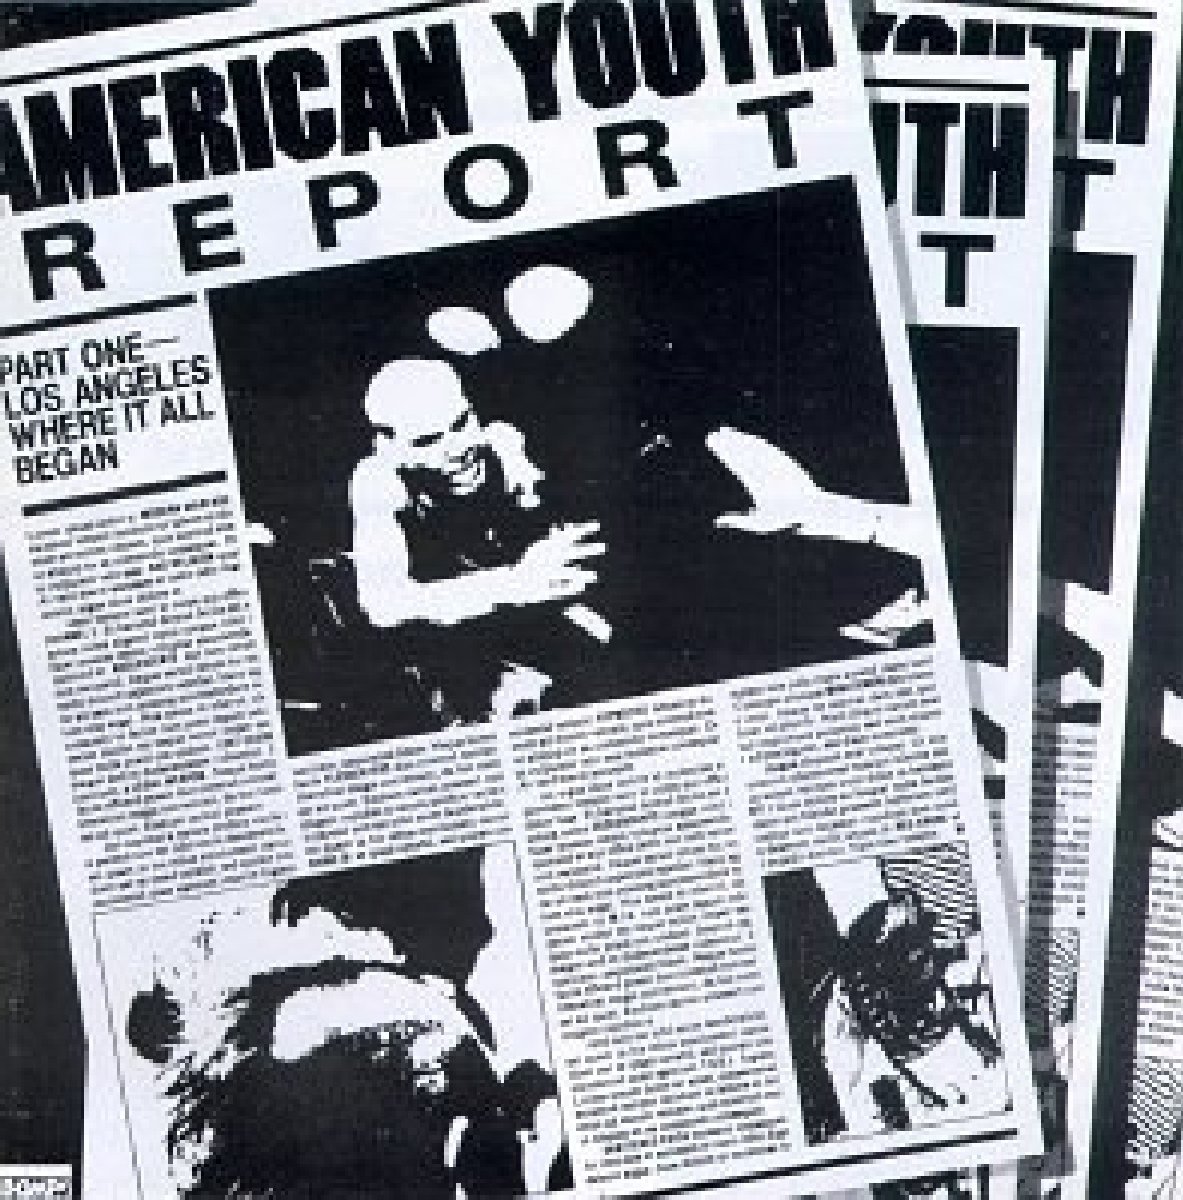 American Youth Report